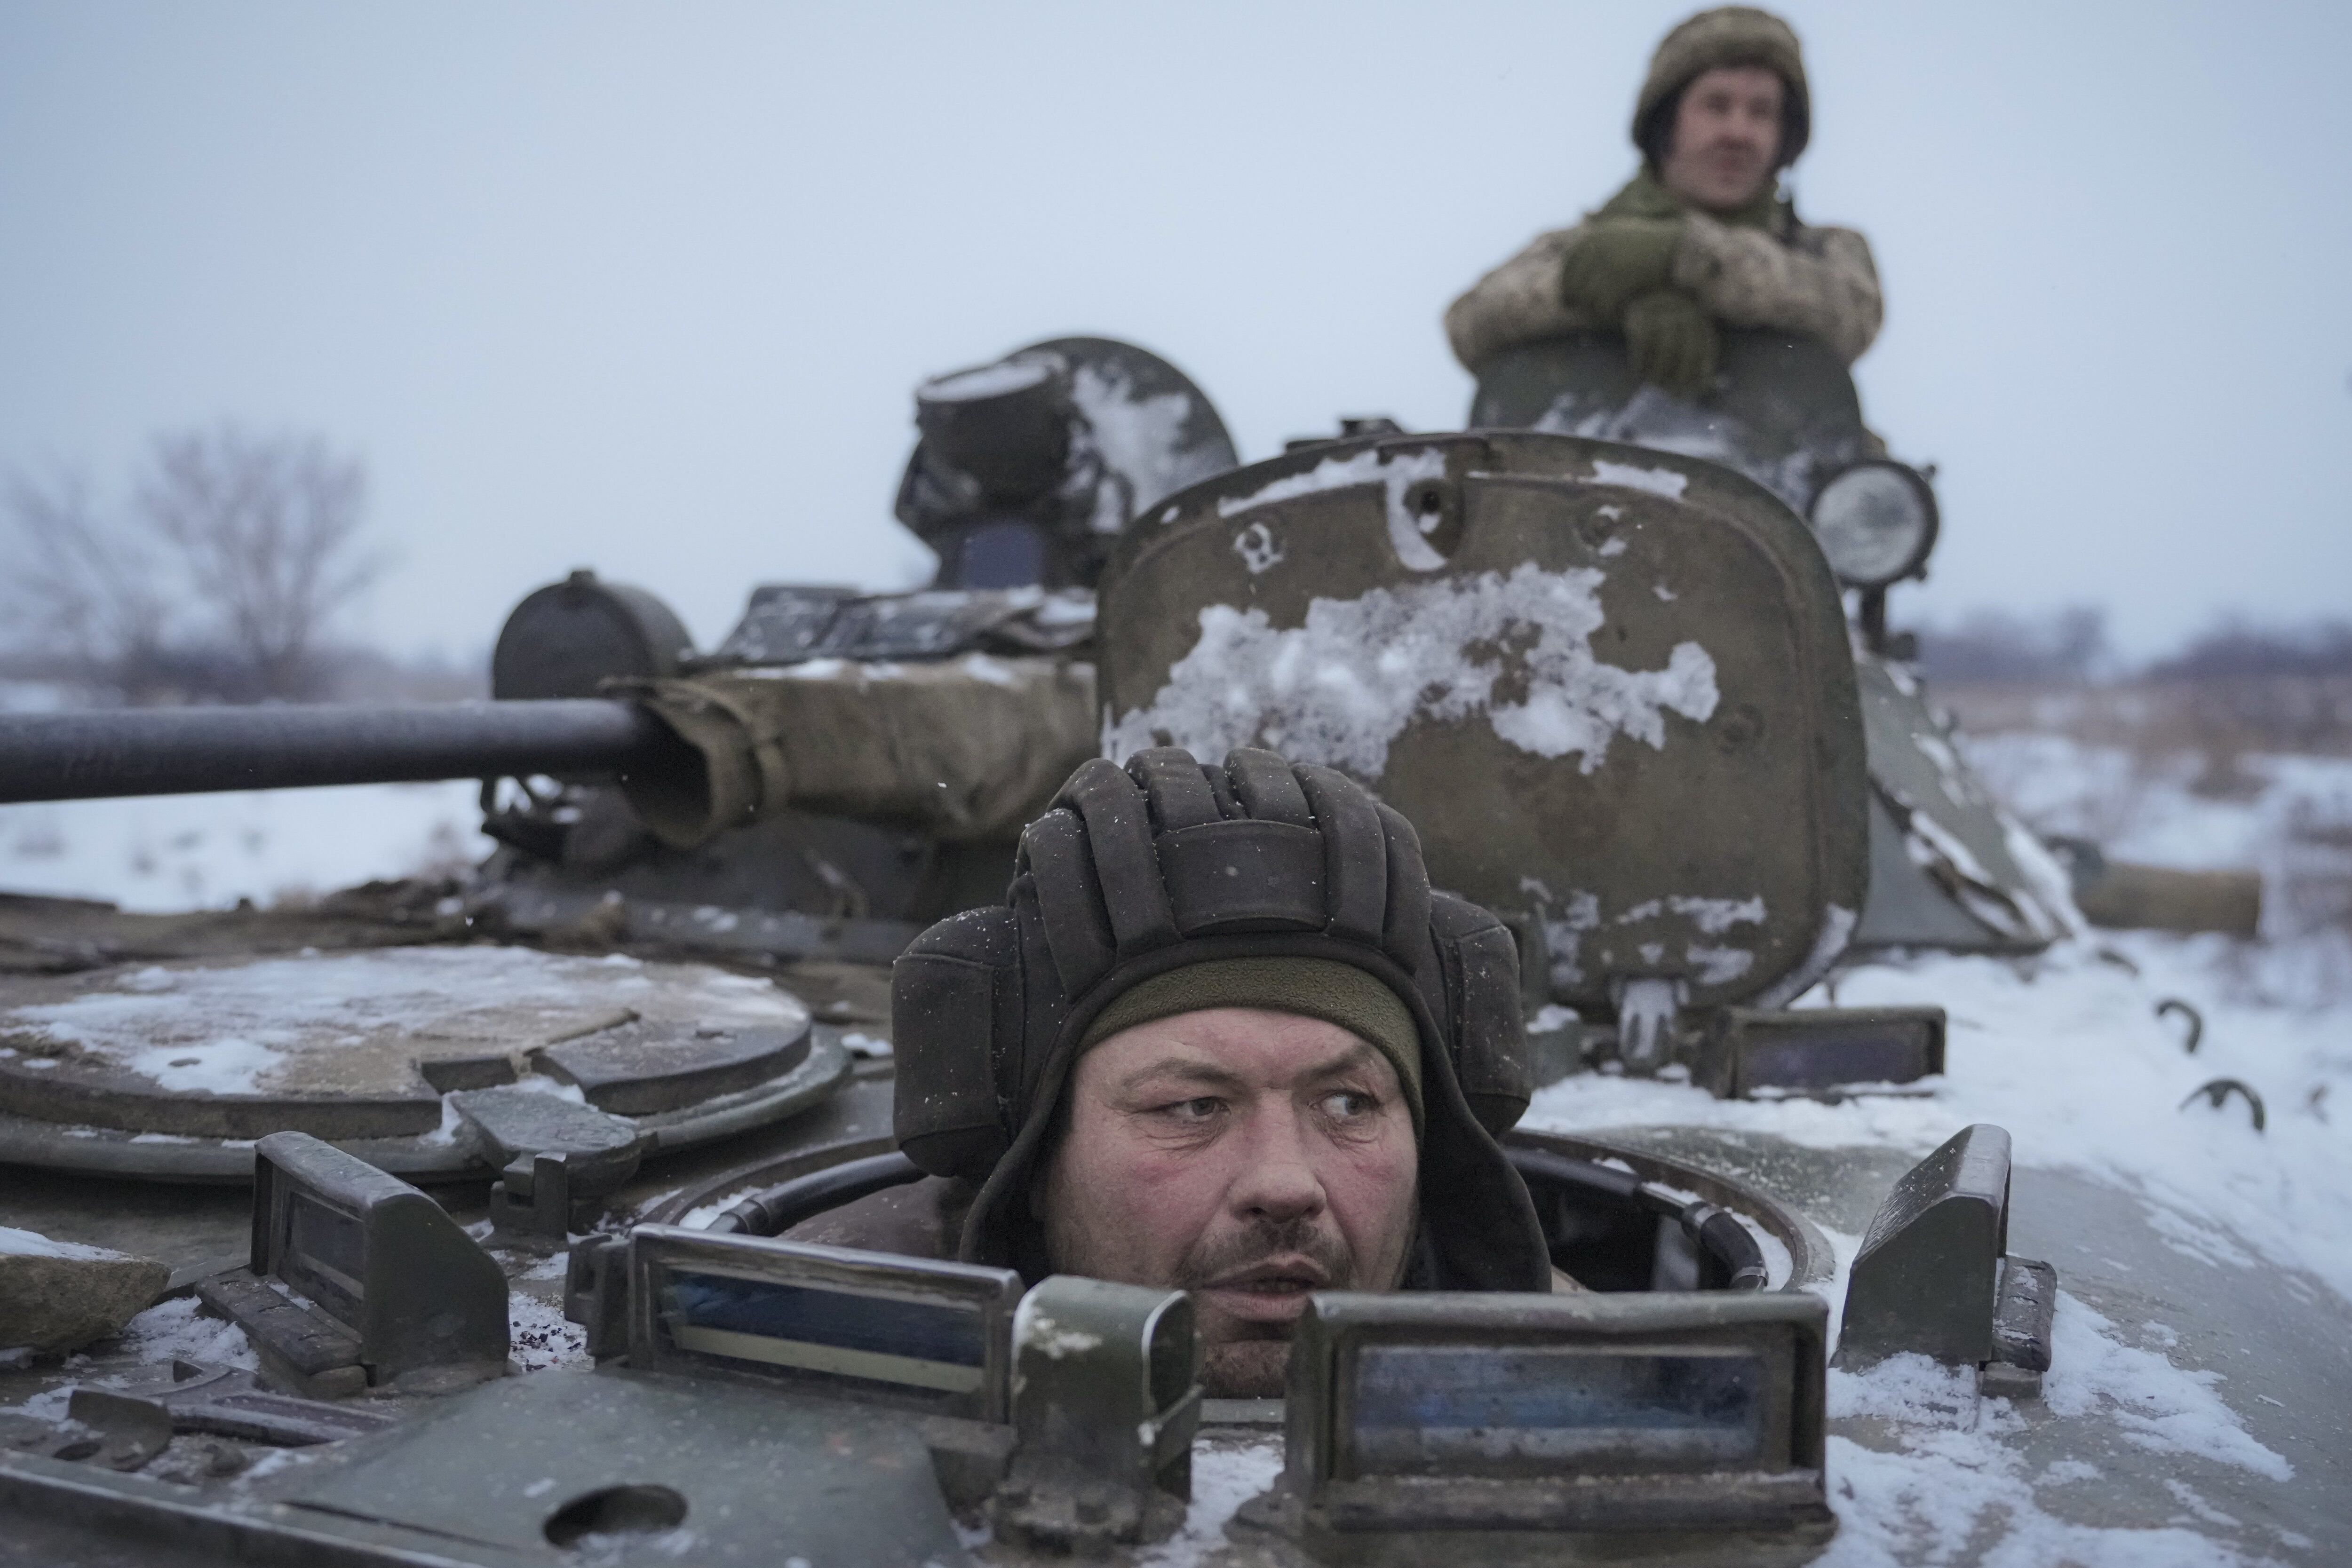 A Ukrainian drives an armored personnel carrier near the front line position in the Luhansk area of ​​eastern Ukraine.  The photo is from last Friday.  (Photo: AP)